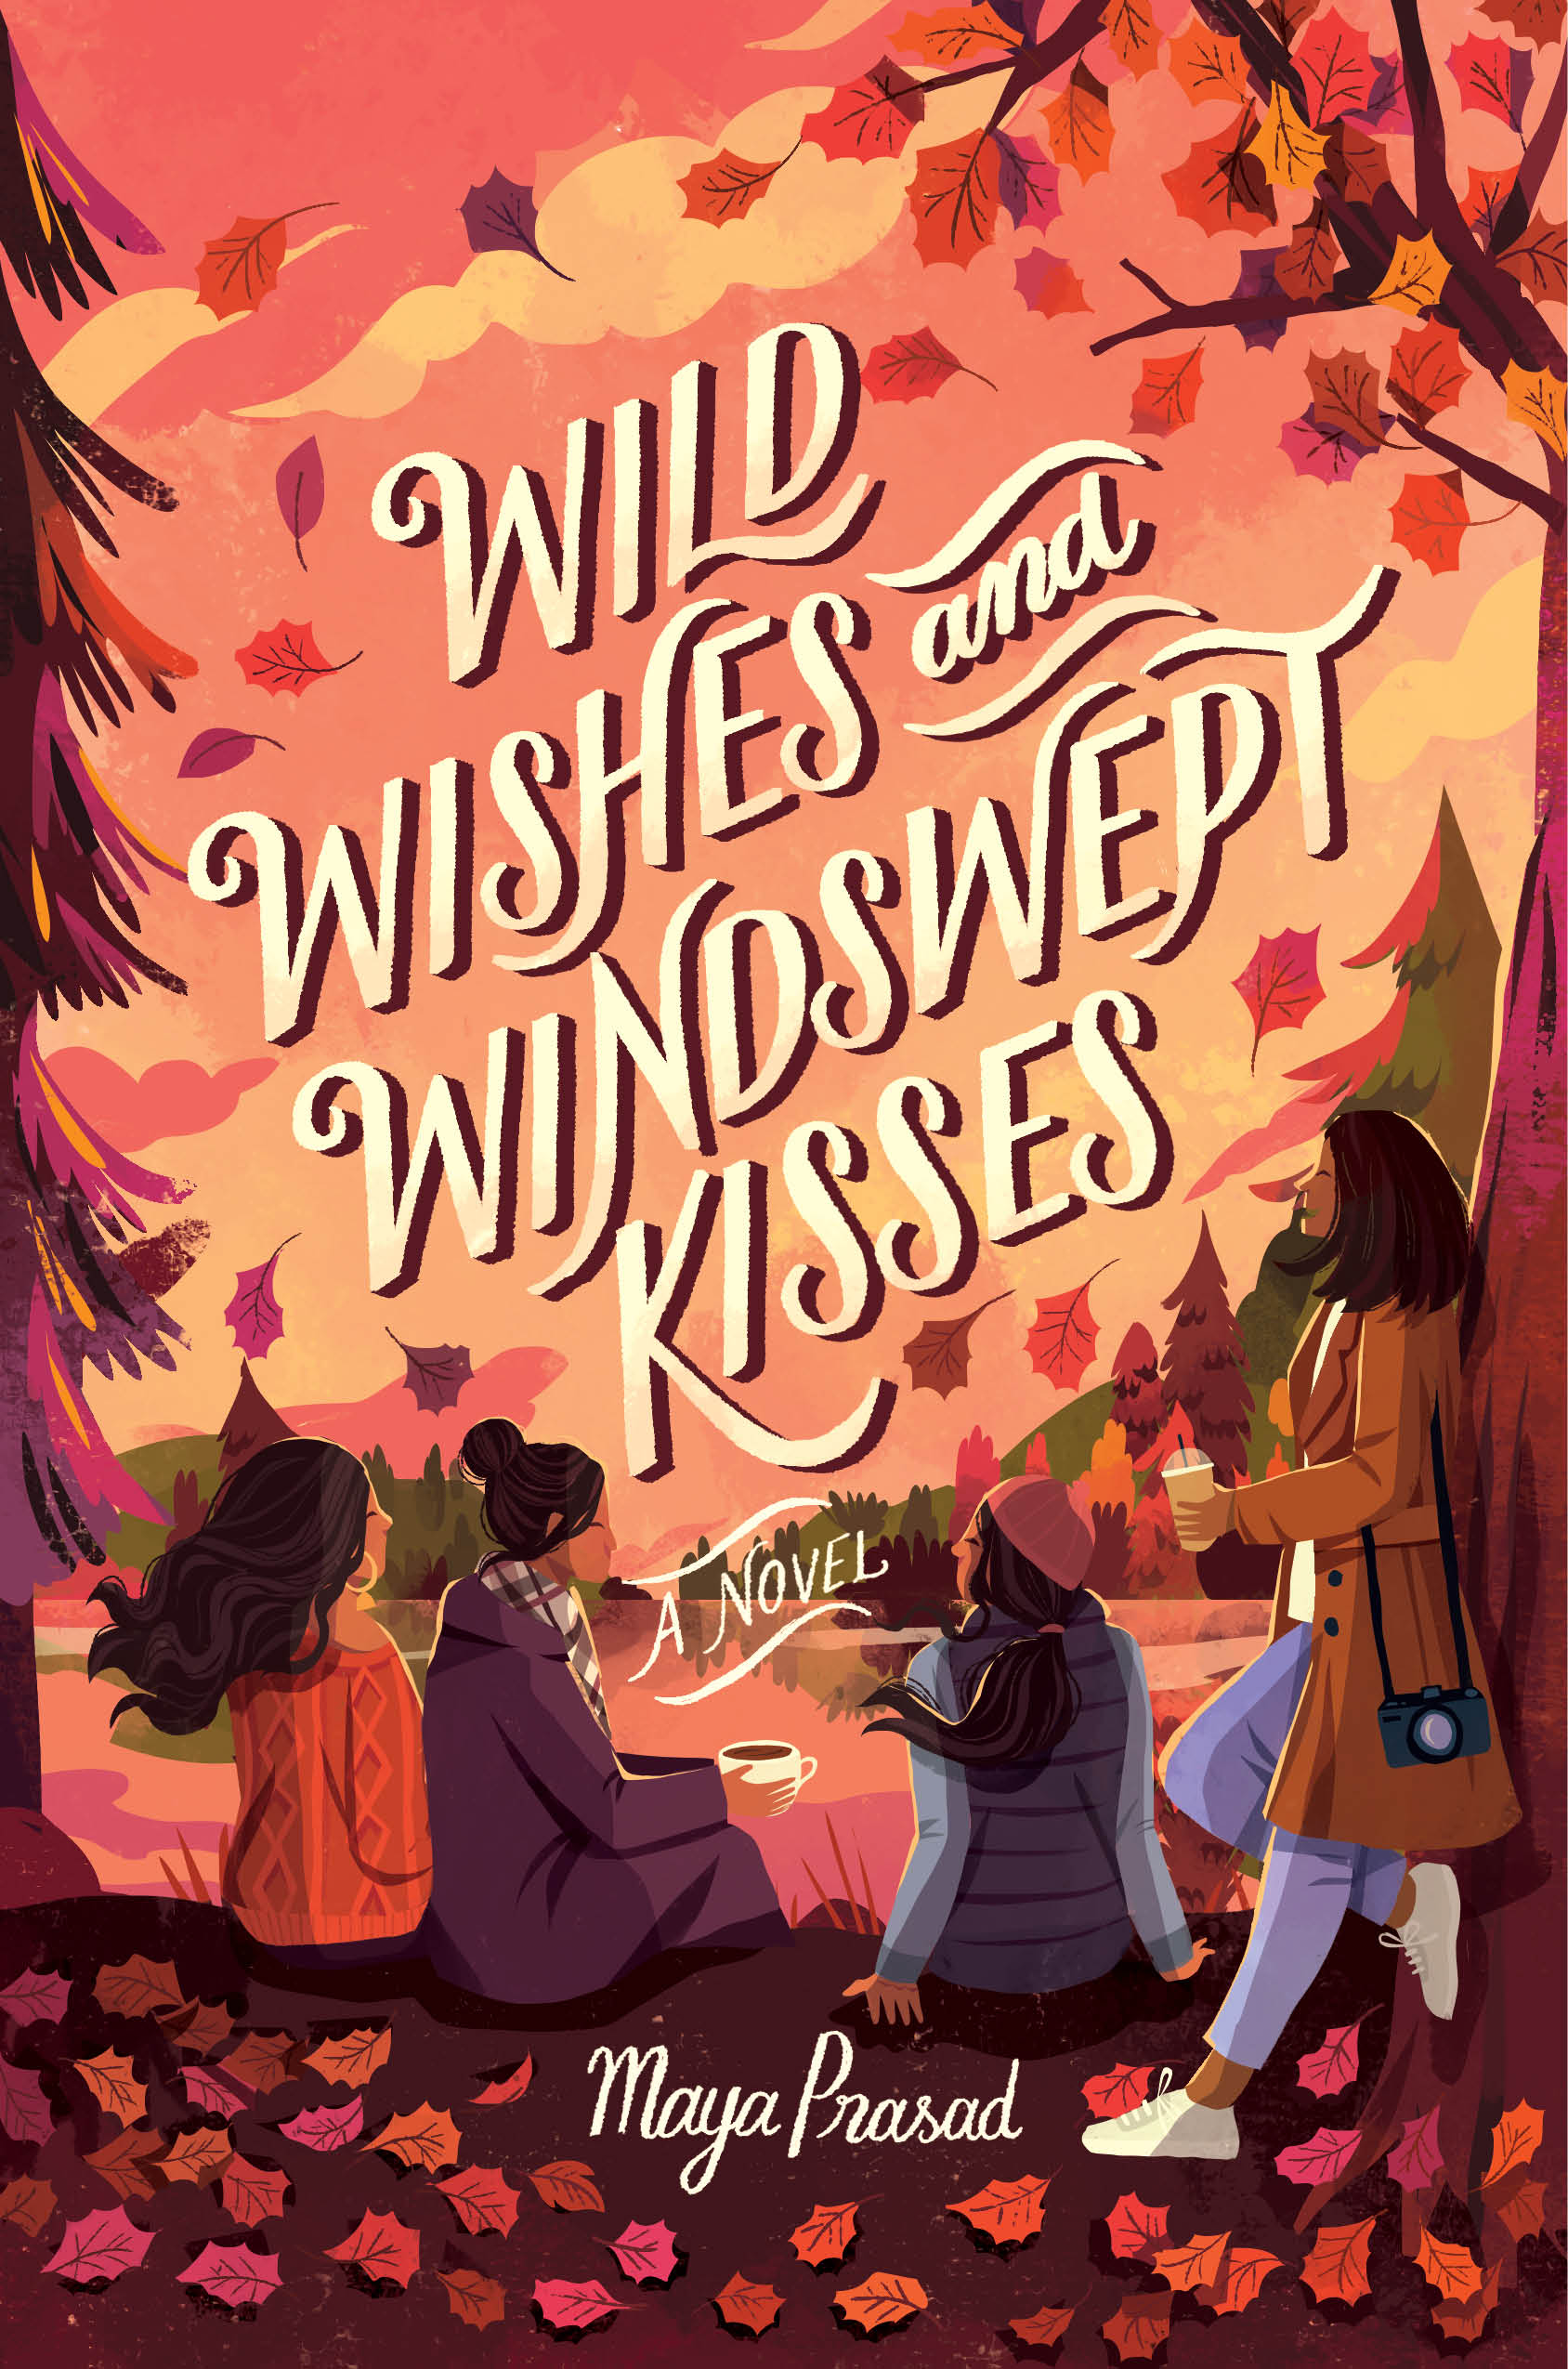 Cover of Wild Wishes and Windswept Kisses by Maya Prasad, who offers writing feedback tips in this blog post.